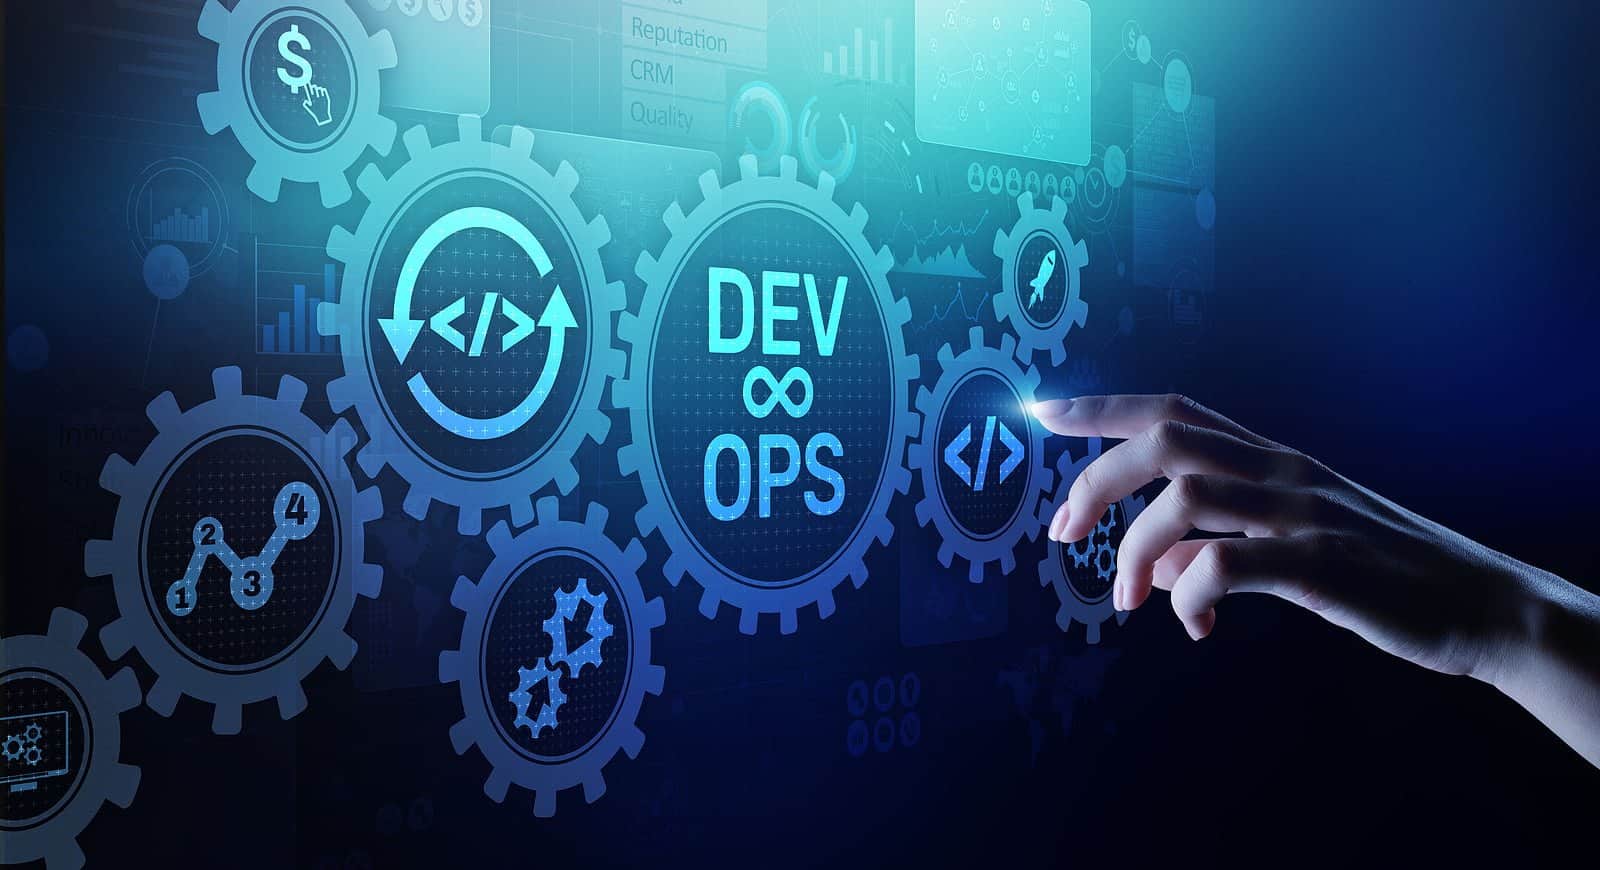 What do I need to know before Starting DevOps